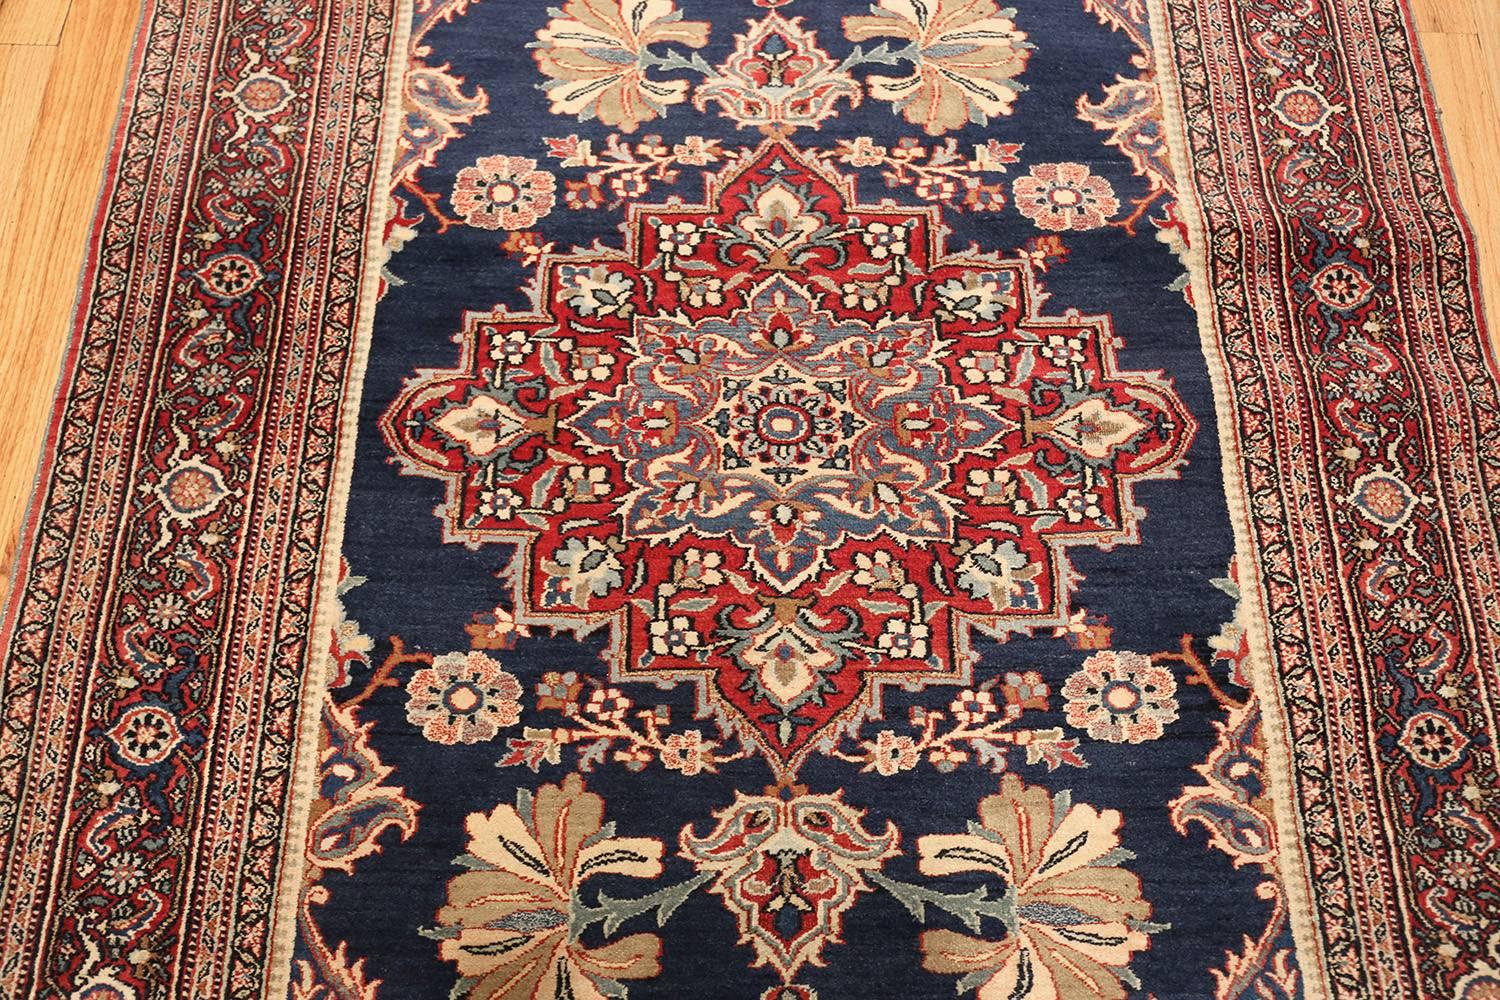 Beautiful Antique Persian Khorassan Rug. Size: 4 ft 5 in x 6 ft 8 in 2